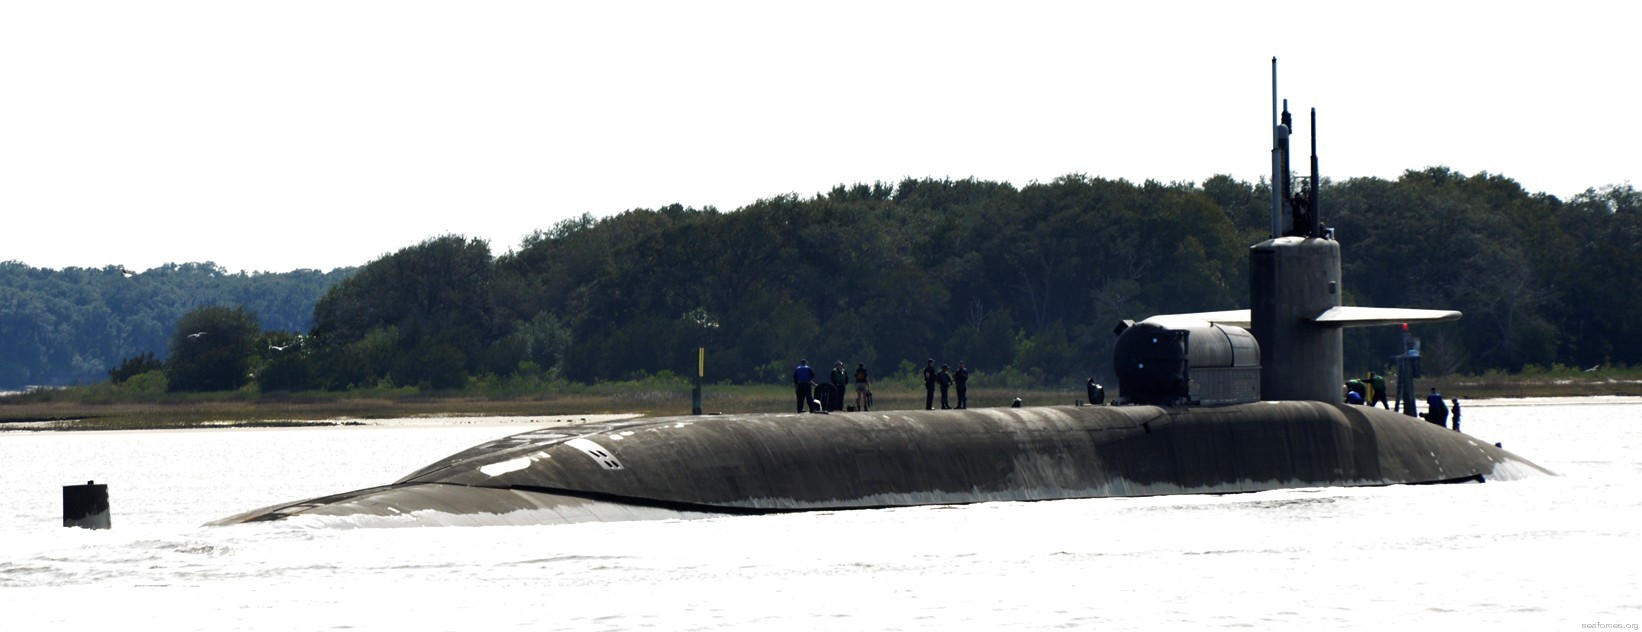 ssgn-729 uss georgia guided missile submarine 2016 03